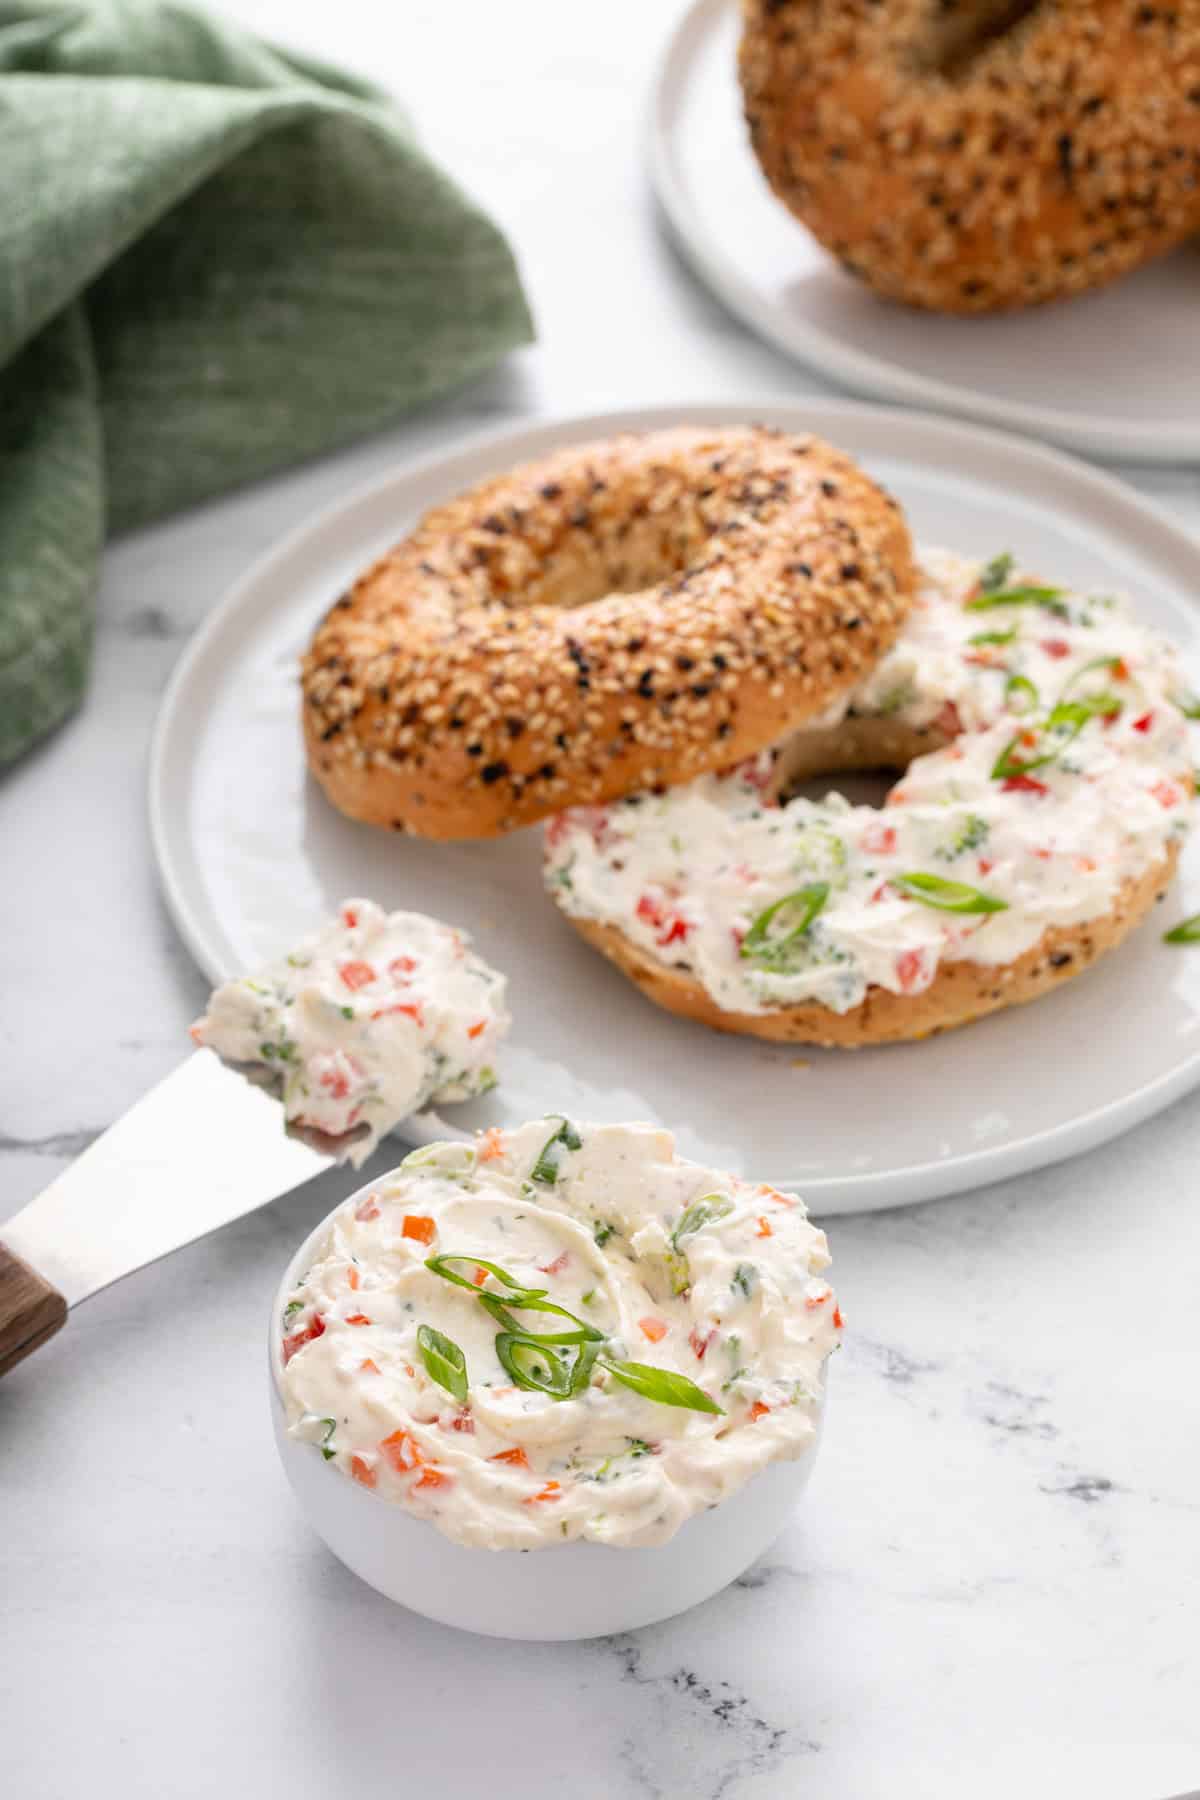 Bowl of veggie cream cheese in front of a plate with a bagel and veggie cream cheese on it.